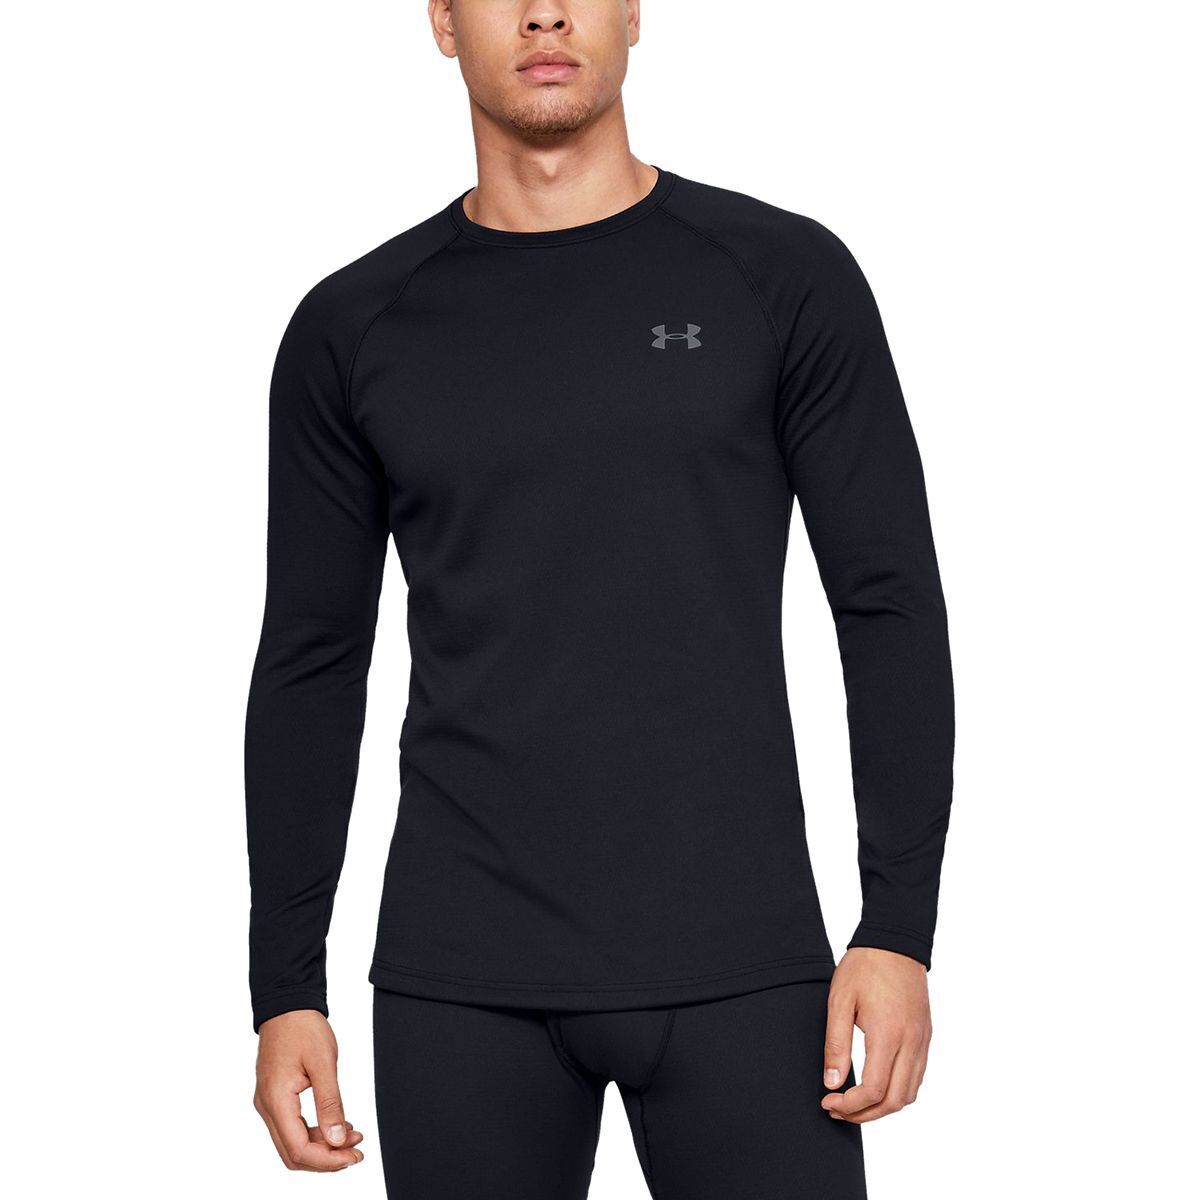 Under Armour Packaged Base 3.0 Crew Top - Men's